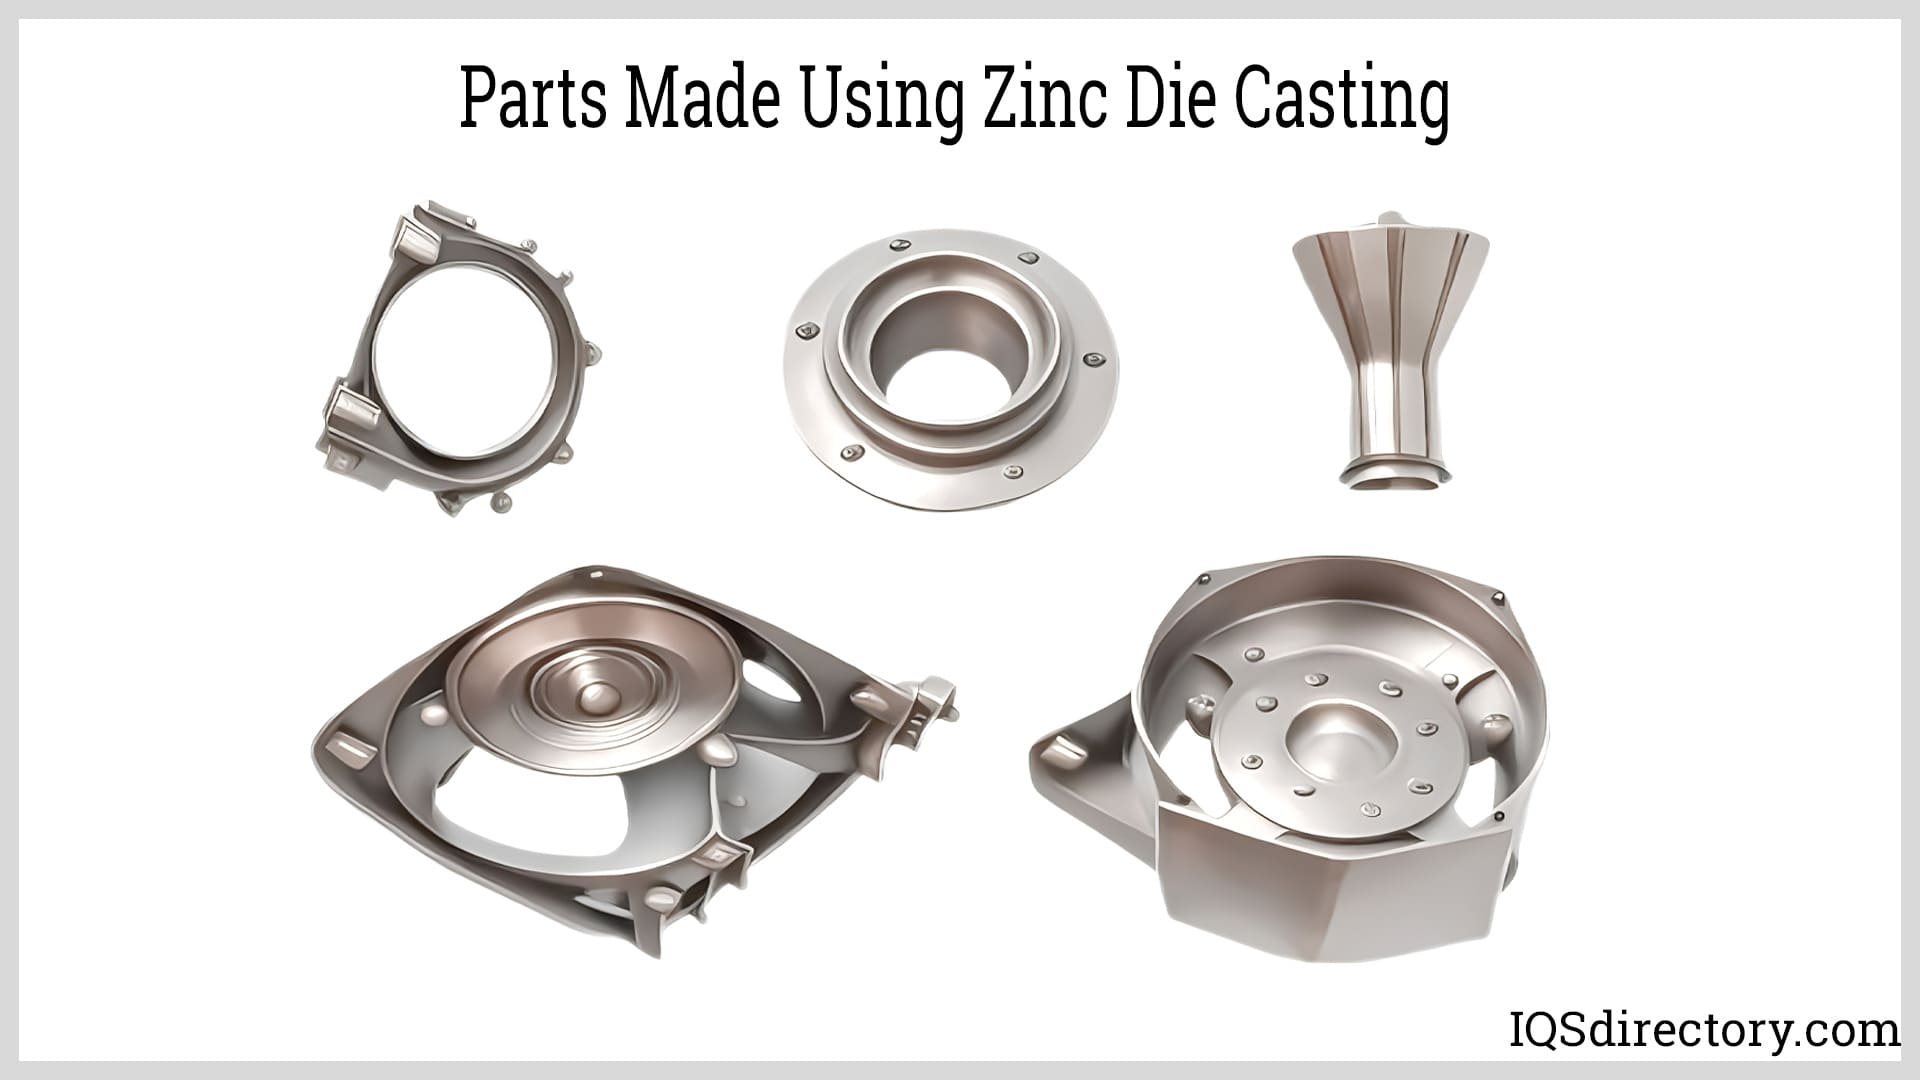 Parts Made Using Zinc Die Casting